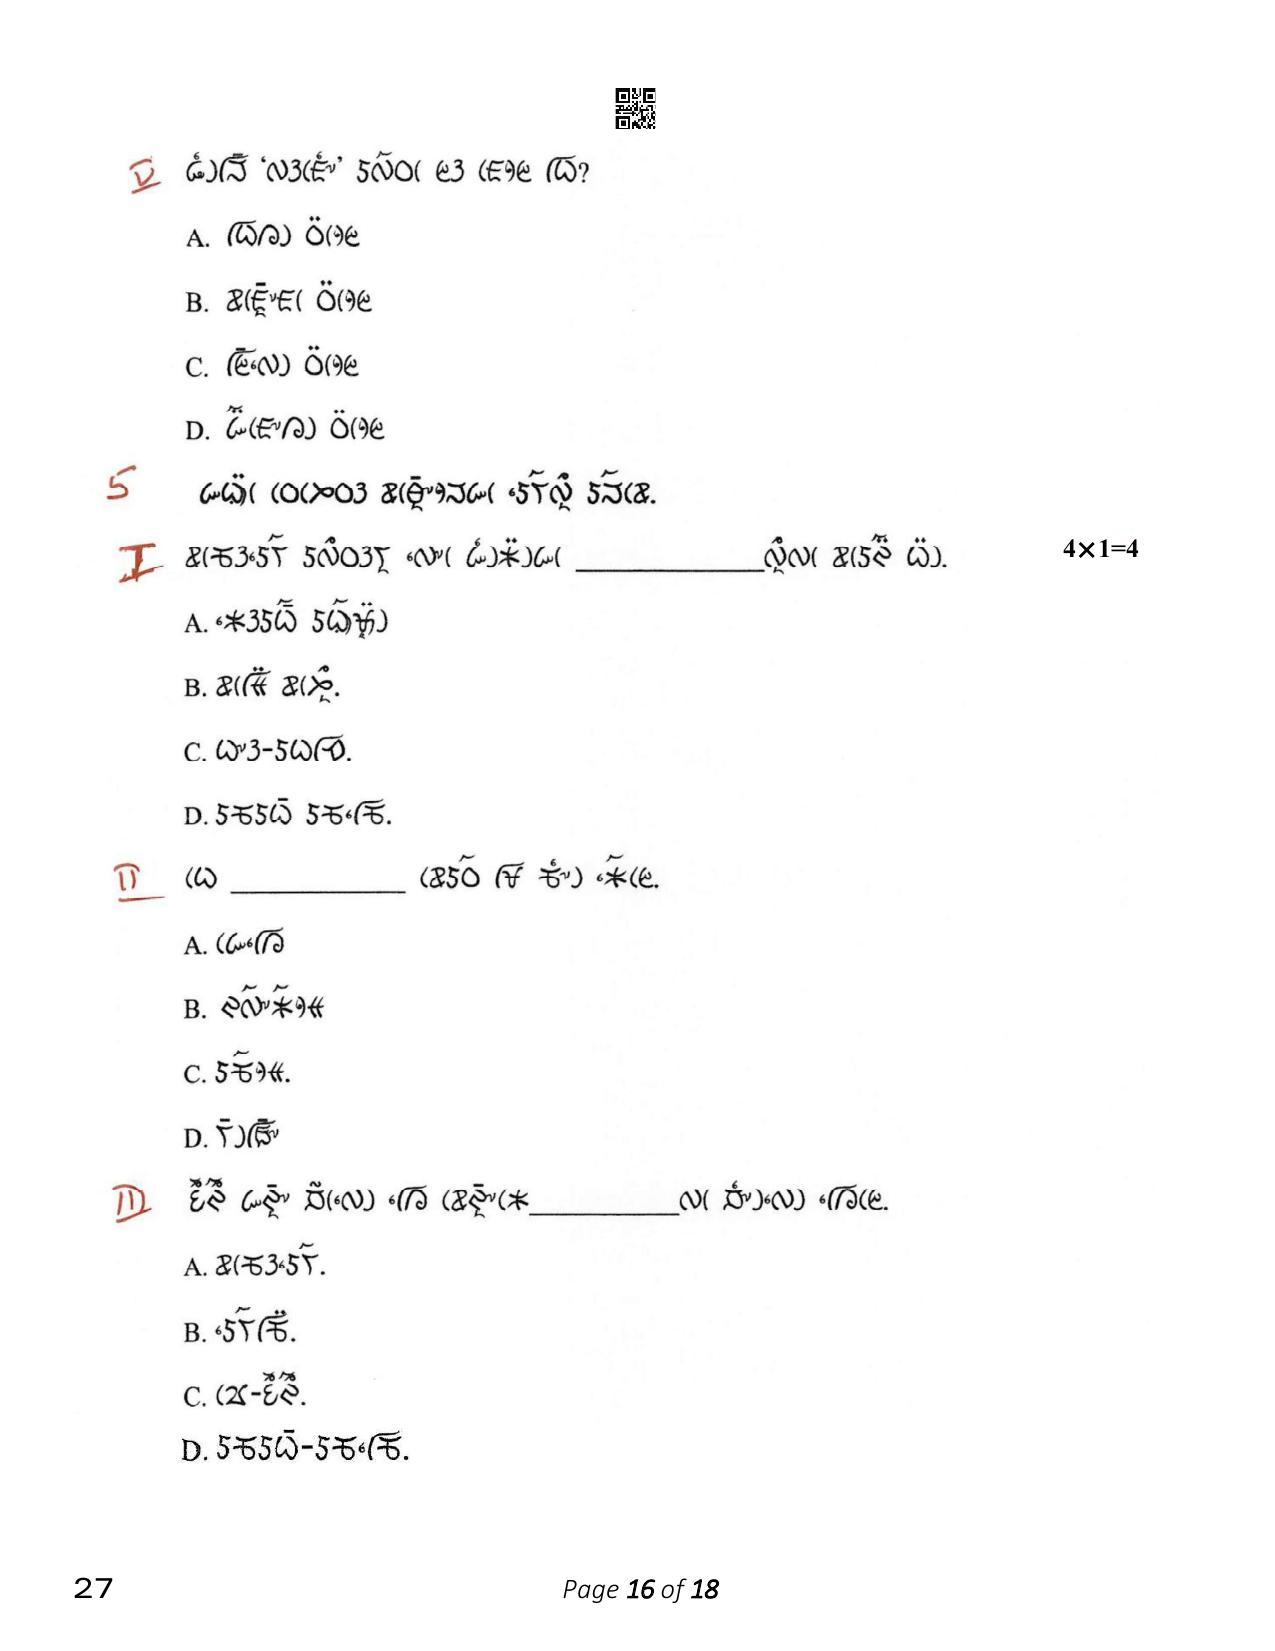 CBSE Class 10 27_Lepcha 2023 Question Paper - Page 16